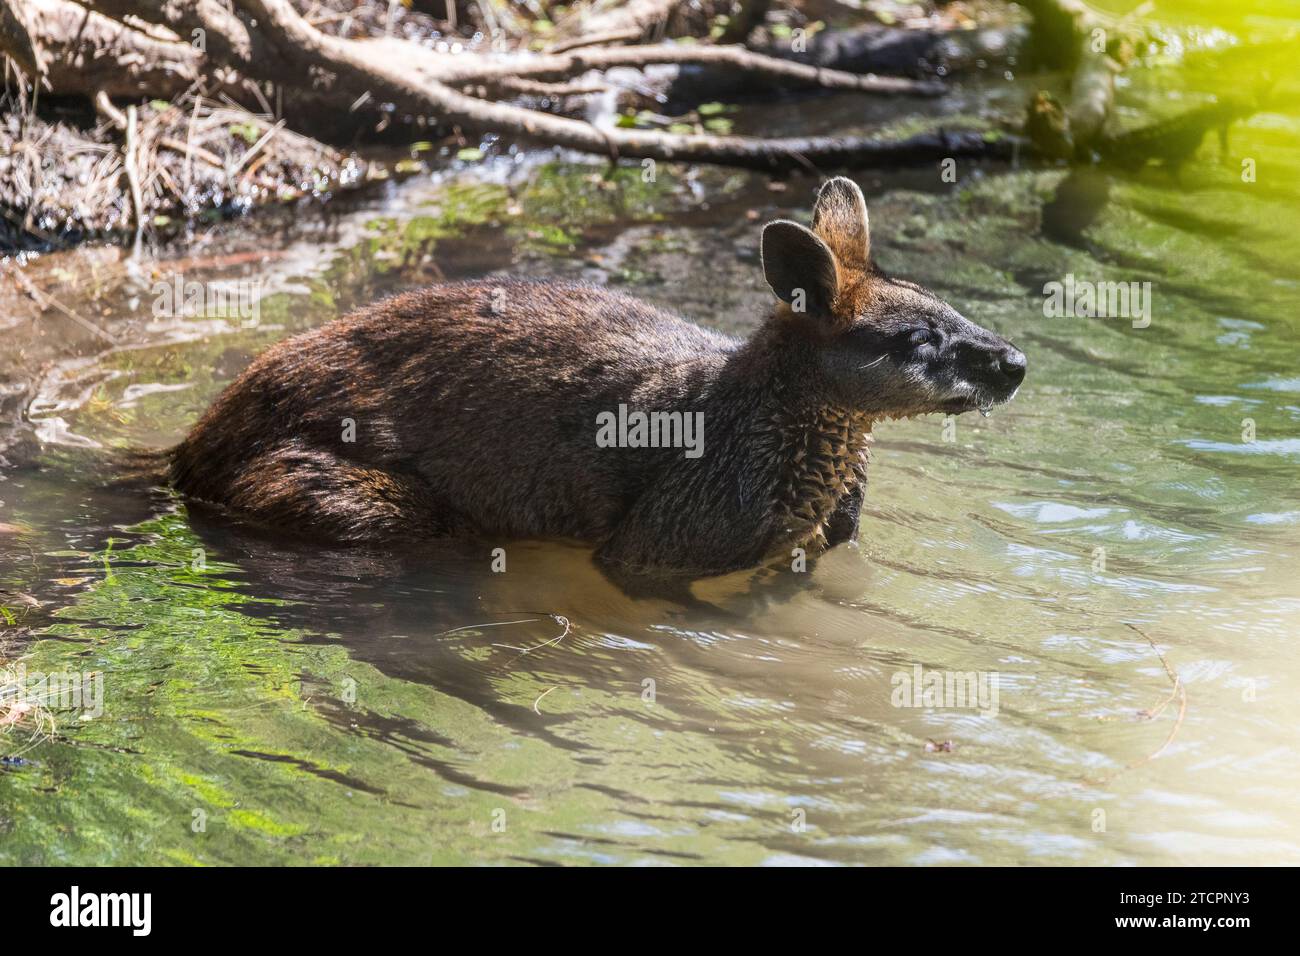 Swamp wallaby (Wallabia bicolor) in a stream to drink Stock Photo